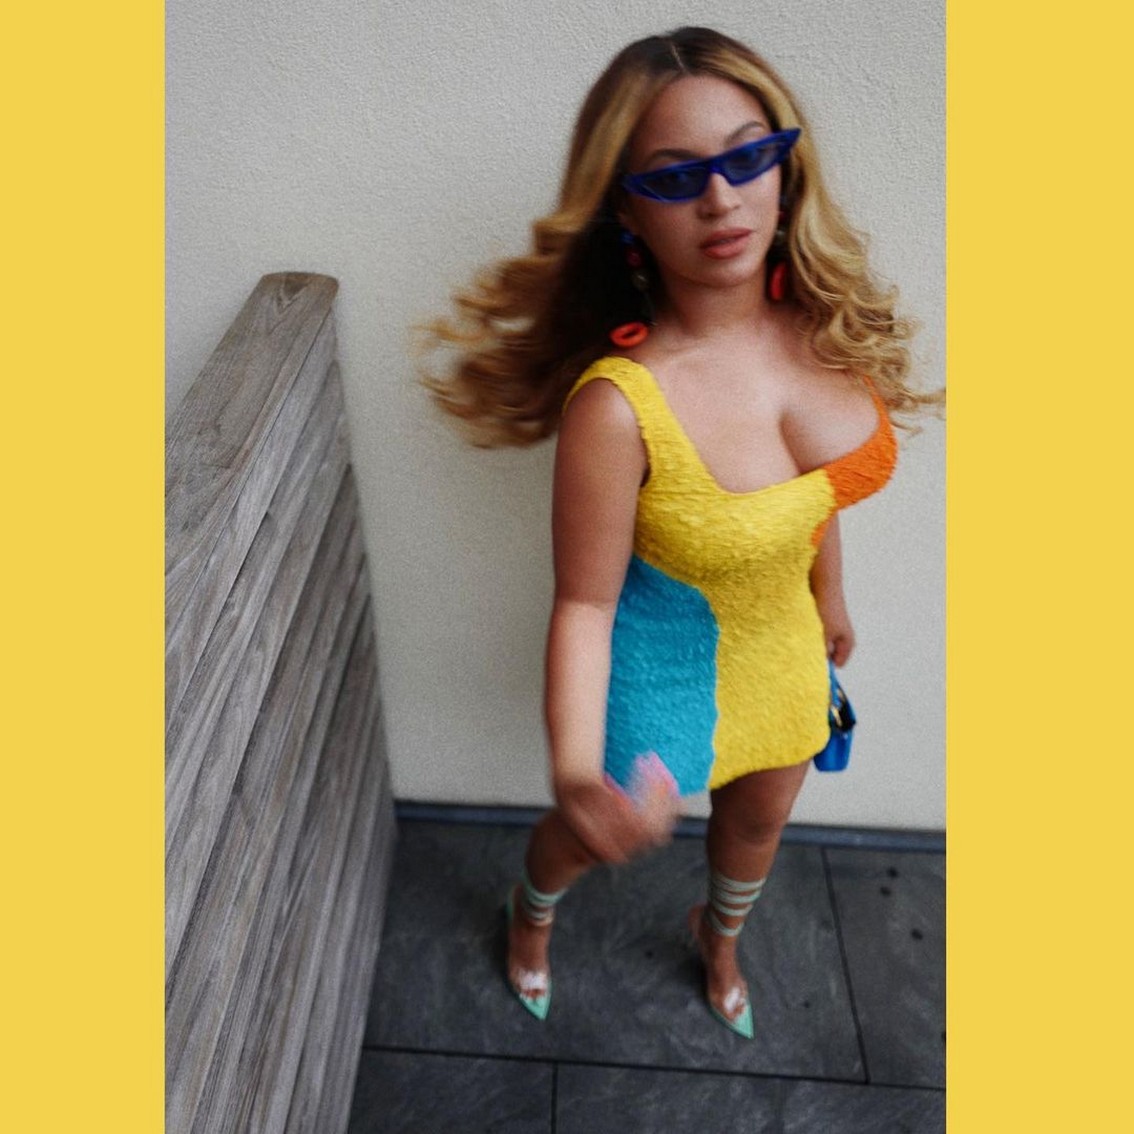 Beyonce Sexy Dress By Mara Hoffman TheFappening.Pro 3 - Beyonce Hot In A Little Dress (4 Photos)